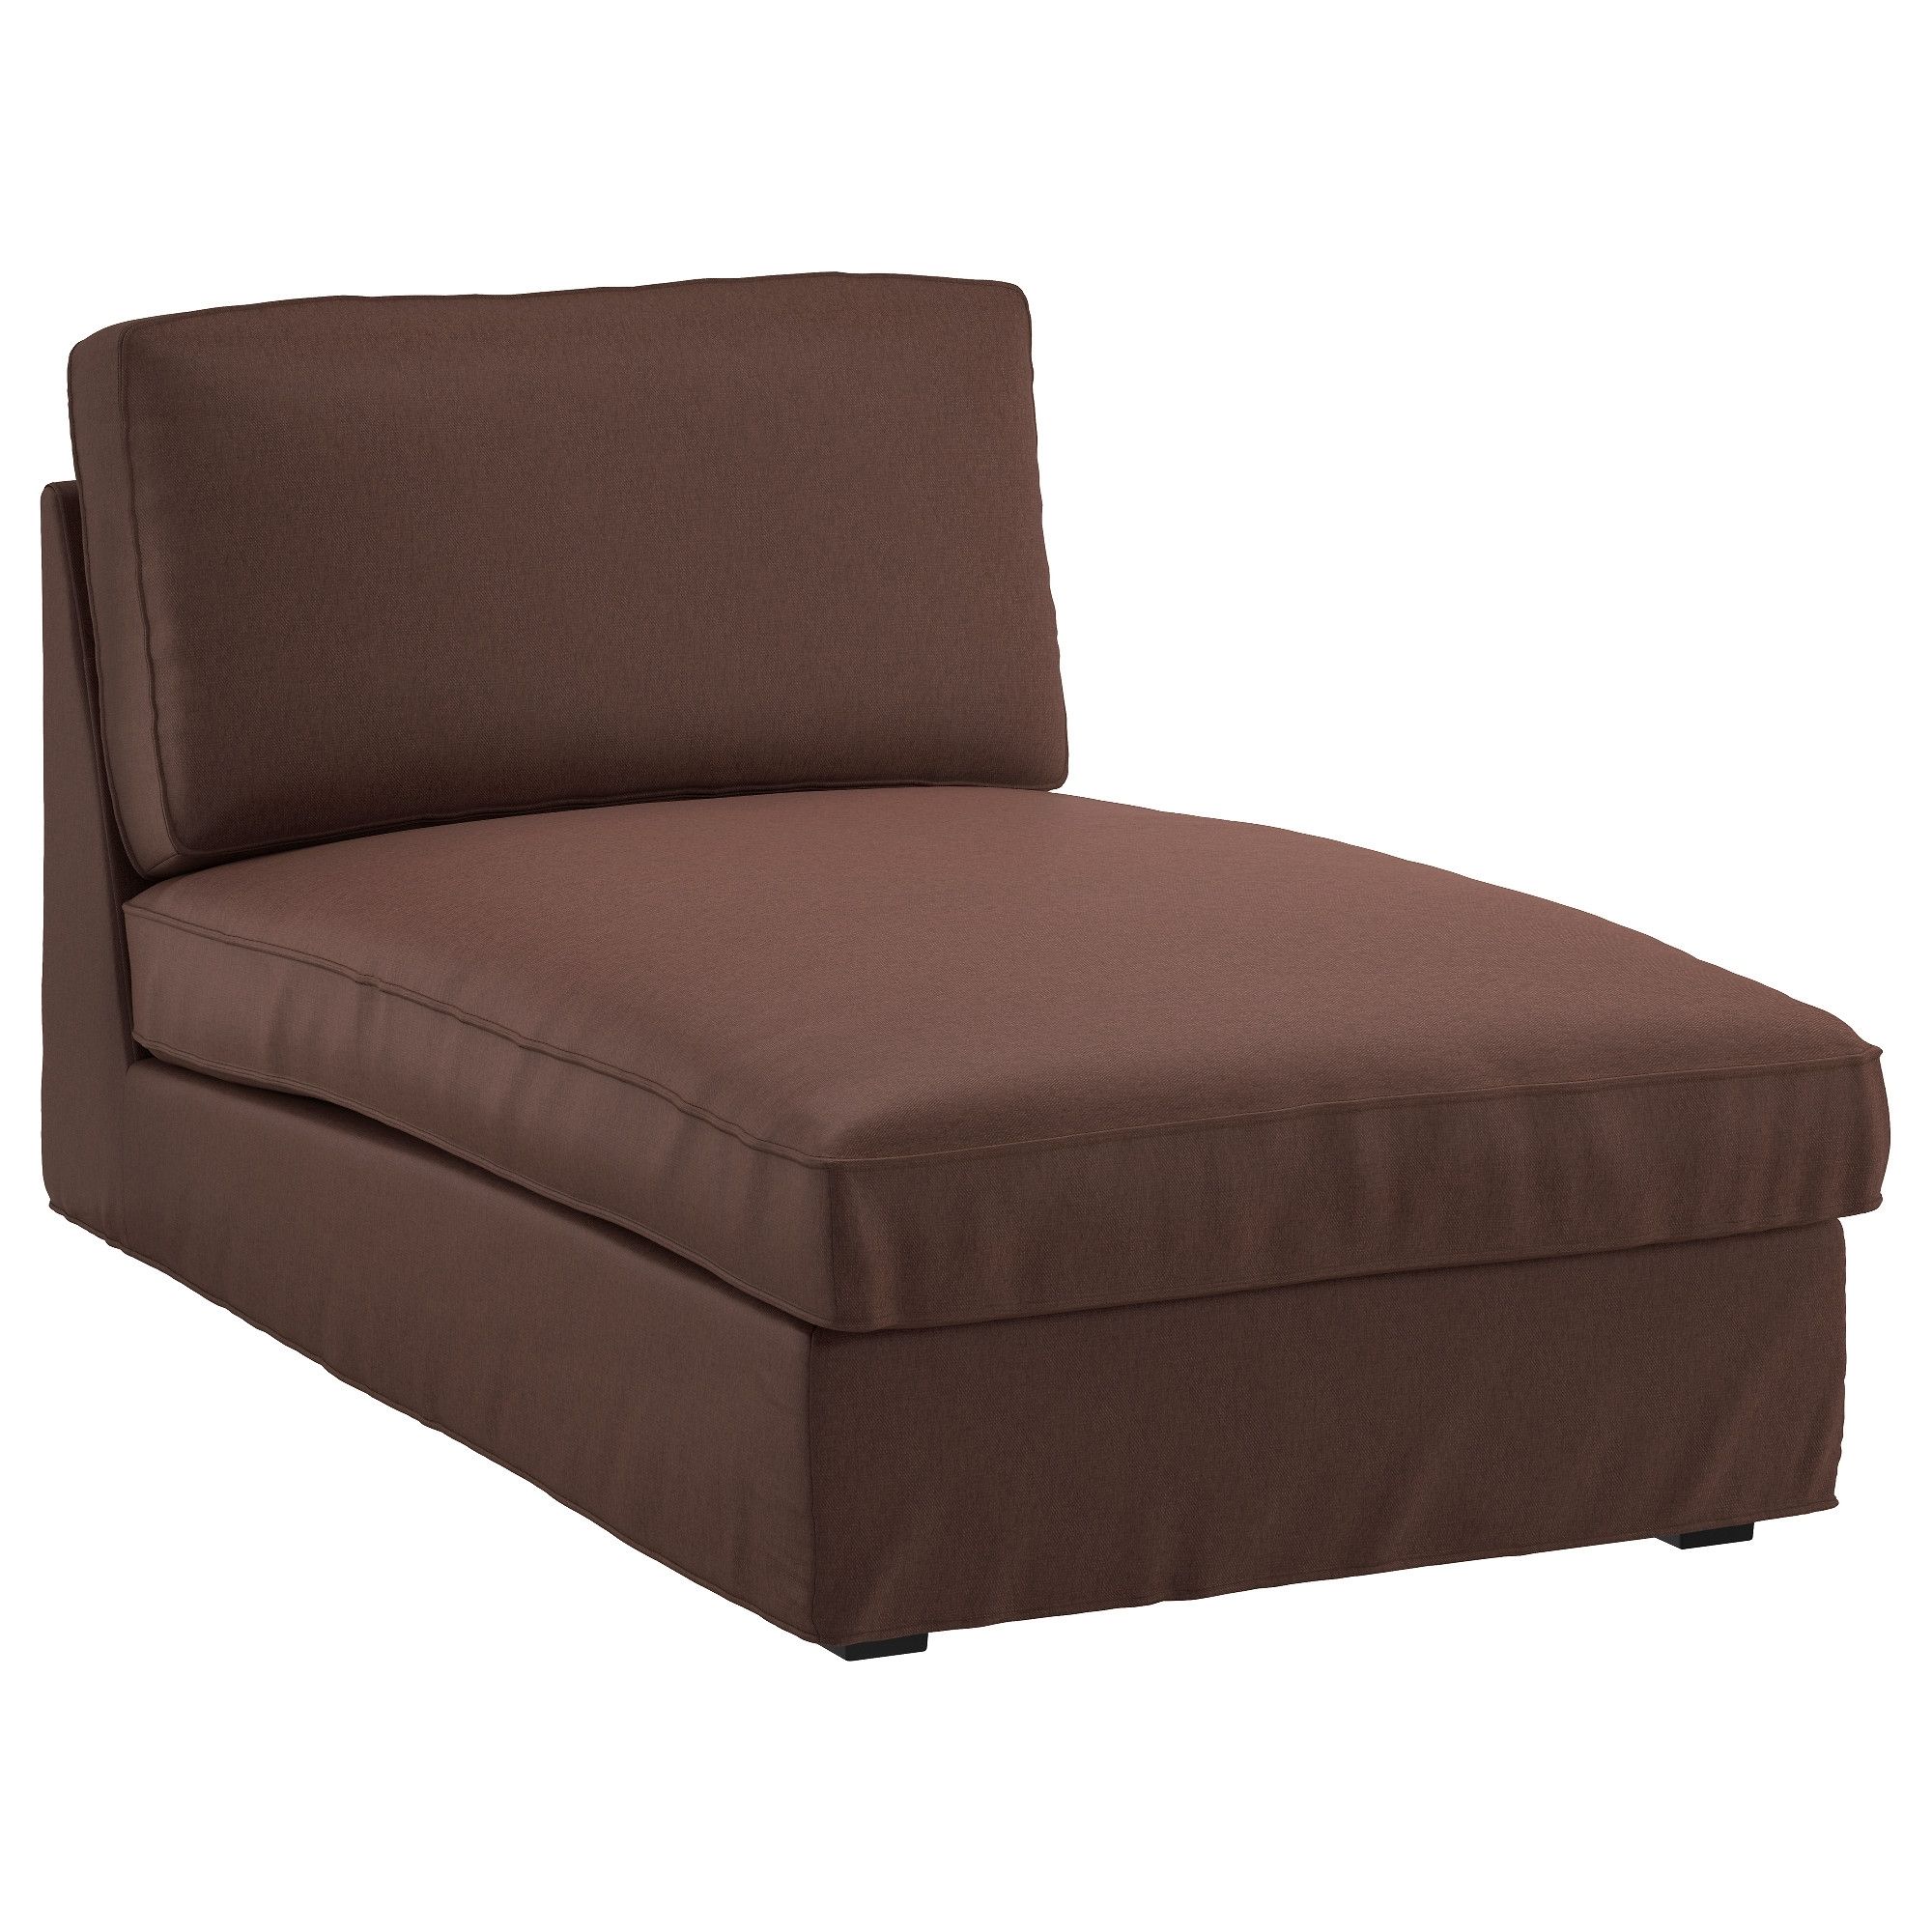 Most Recent Kivik Chaise Longue – Orrsta Light Grey – Ikea In Ikea Chaise Lounge Chairs (View 7 of 15)